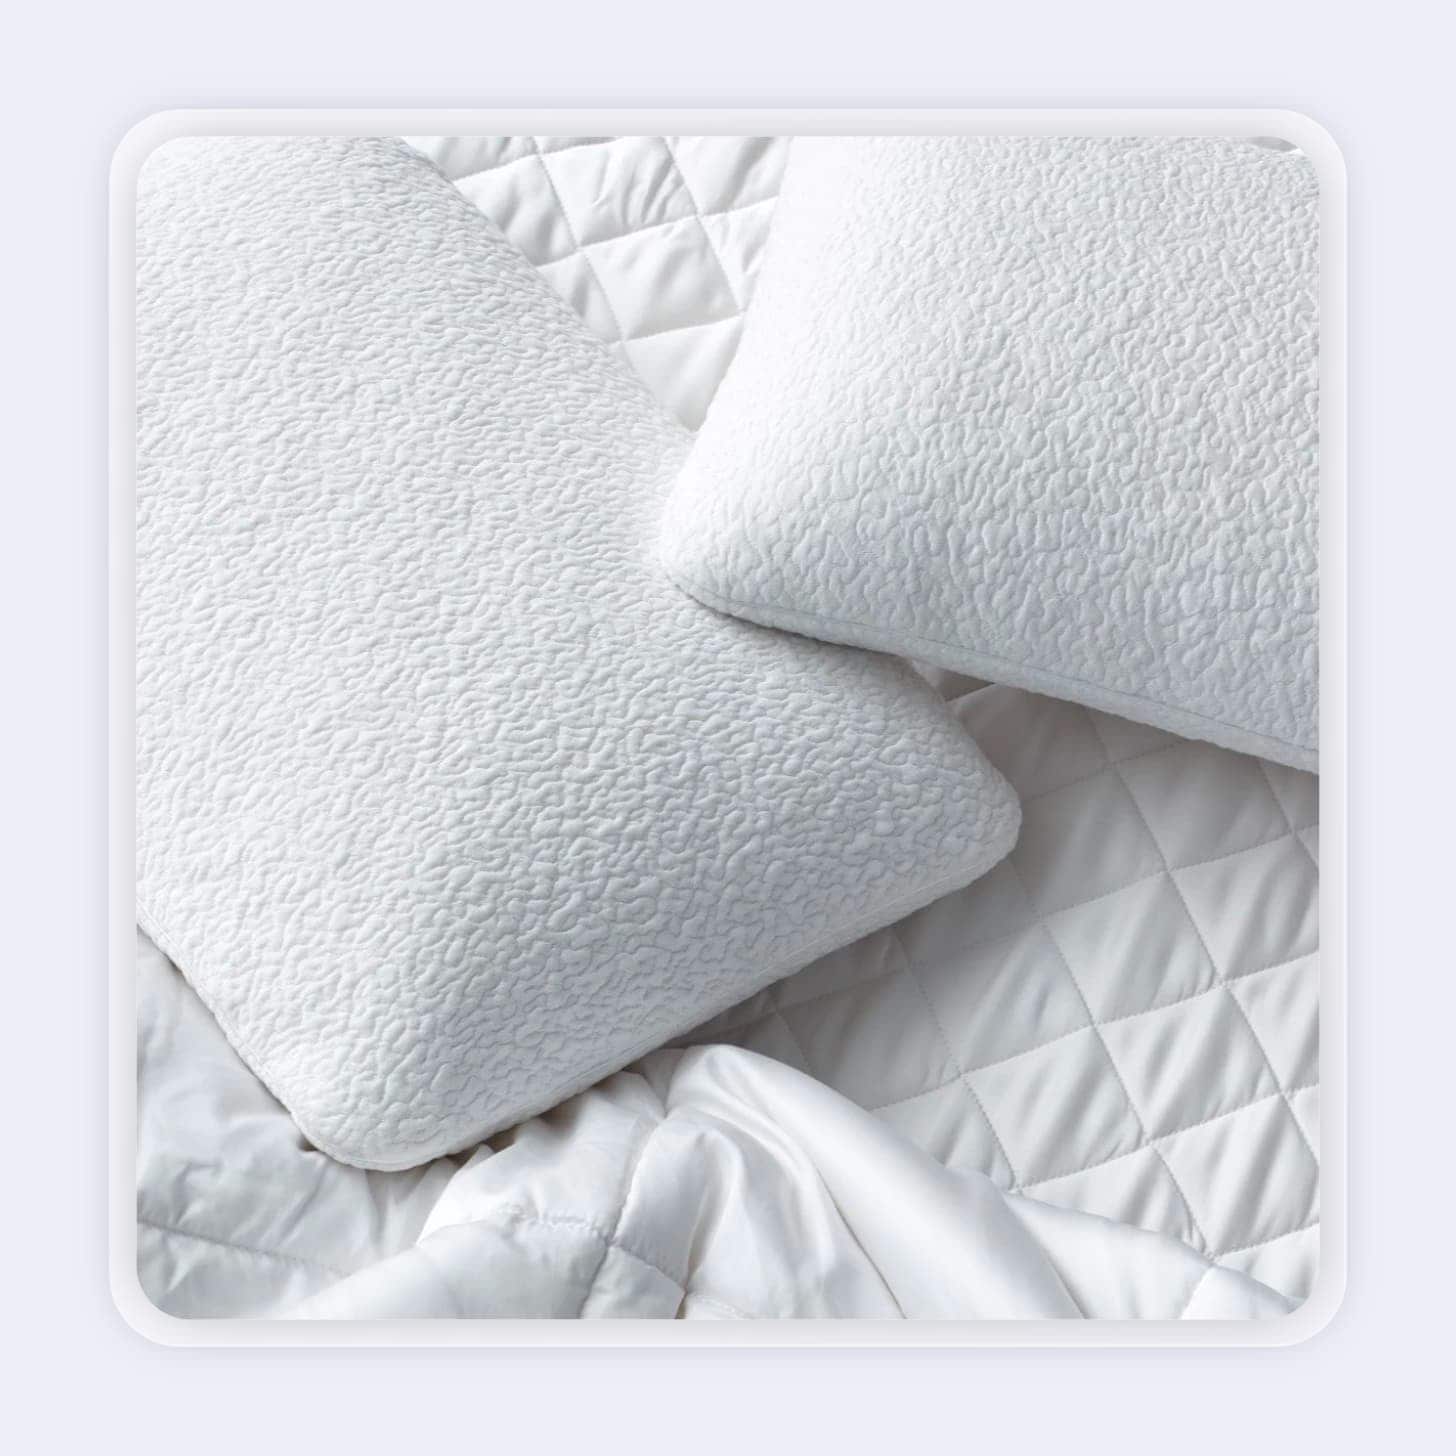 Closeup view of white pillows with a unique, curvy pattern